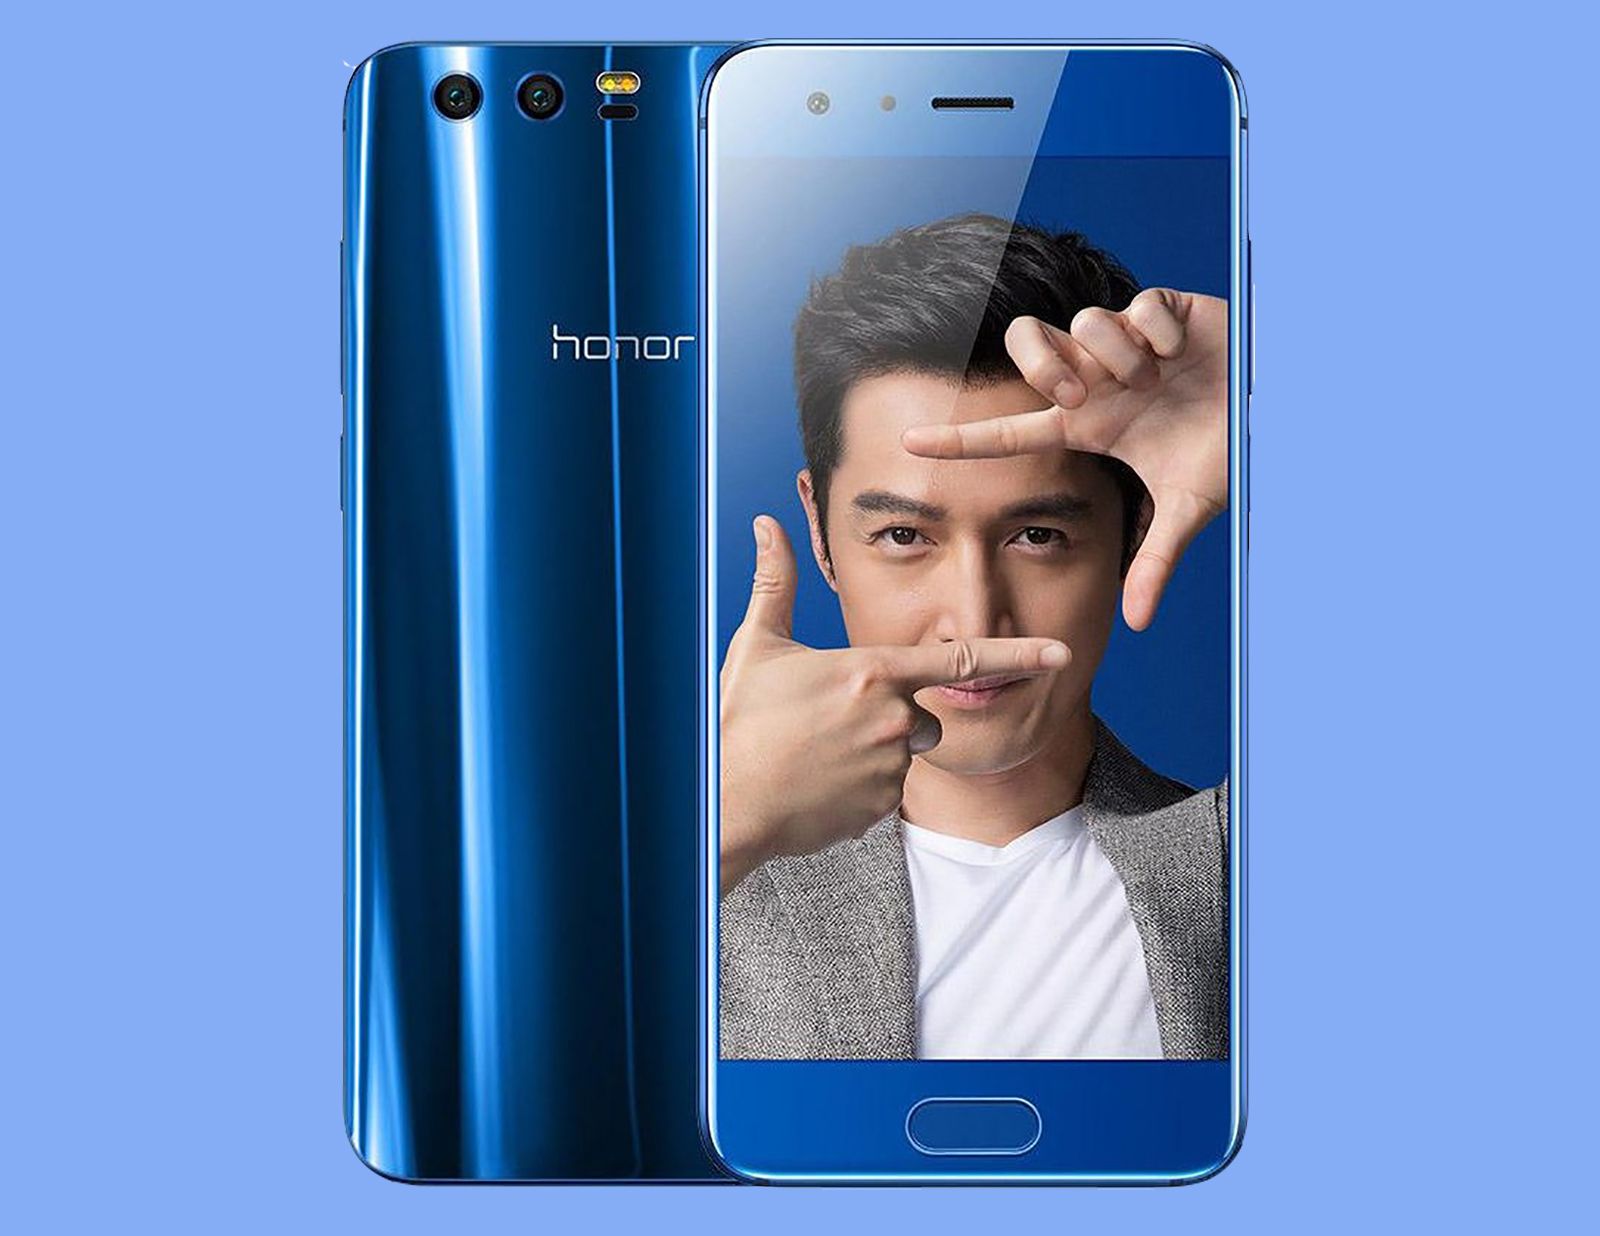 honor 9 arrives in china with dual rear camera all metal body and kirin 960 chipset image 1